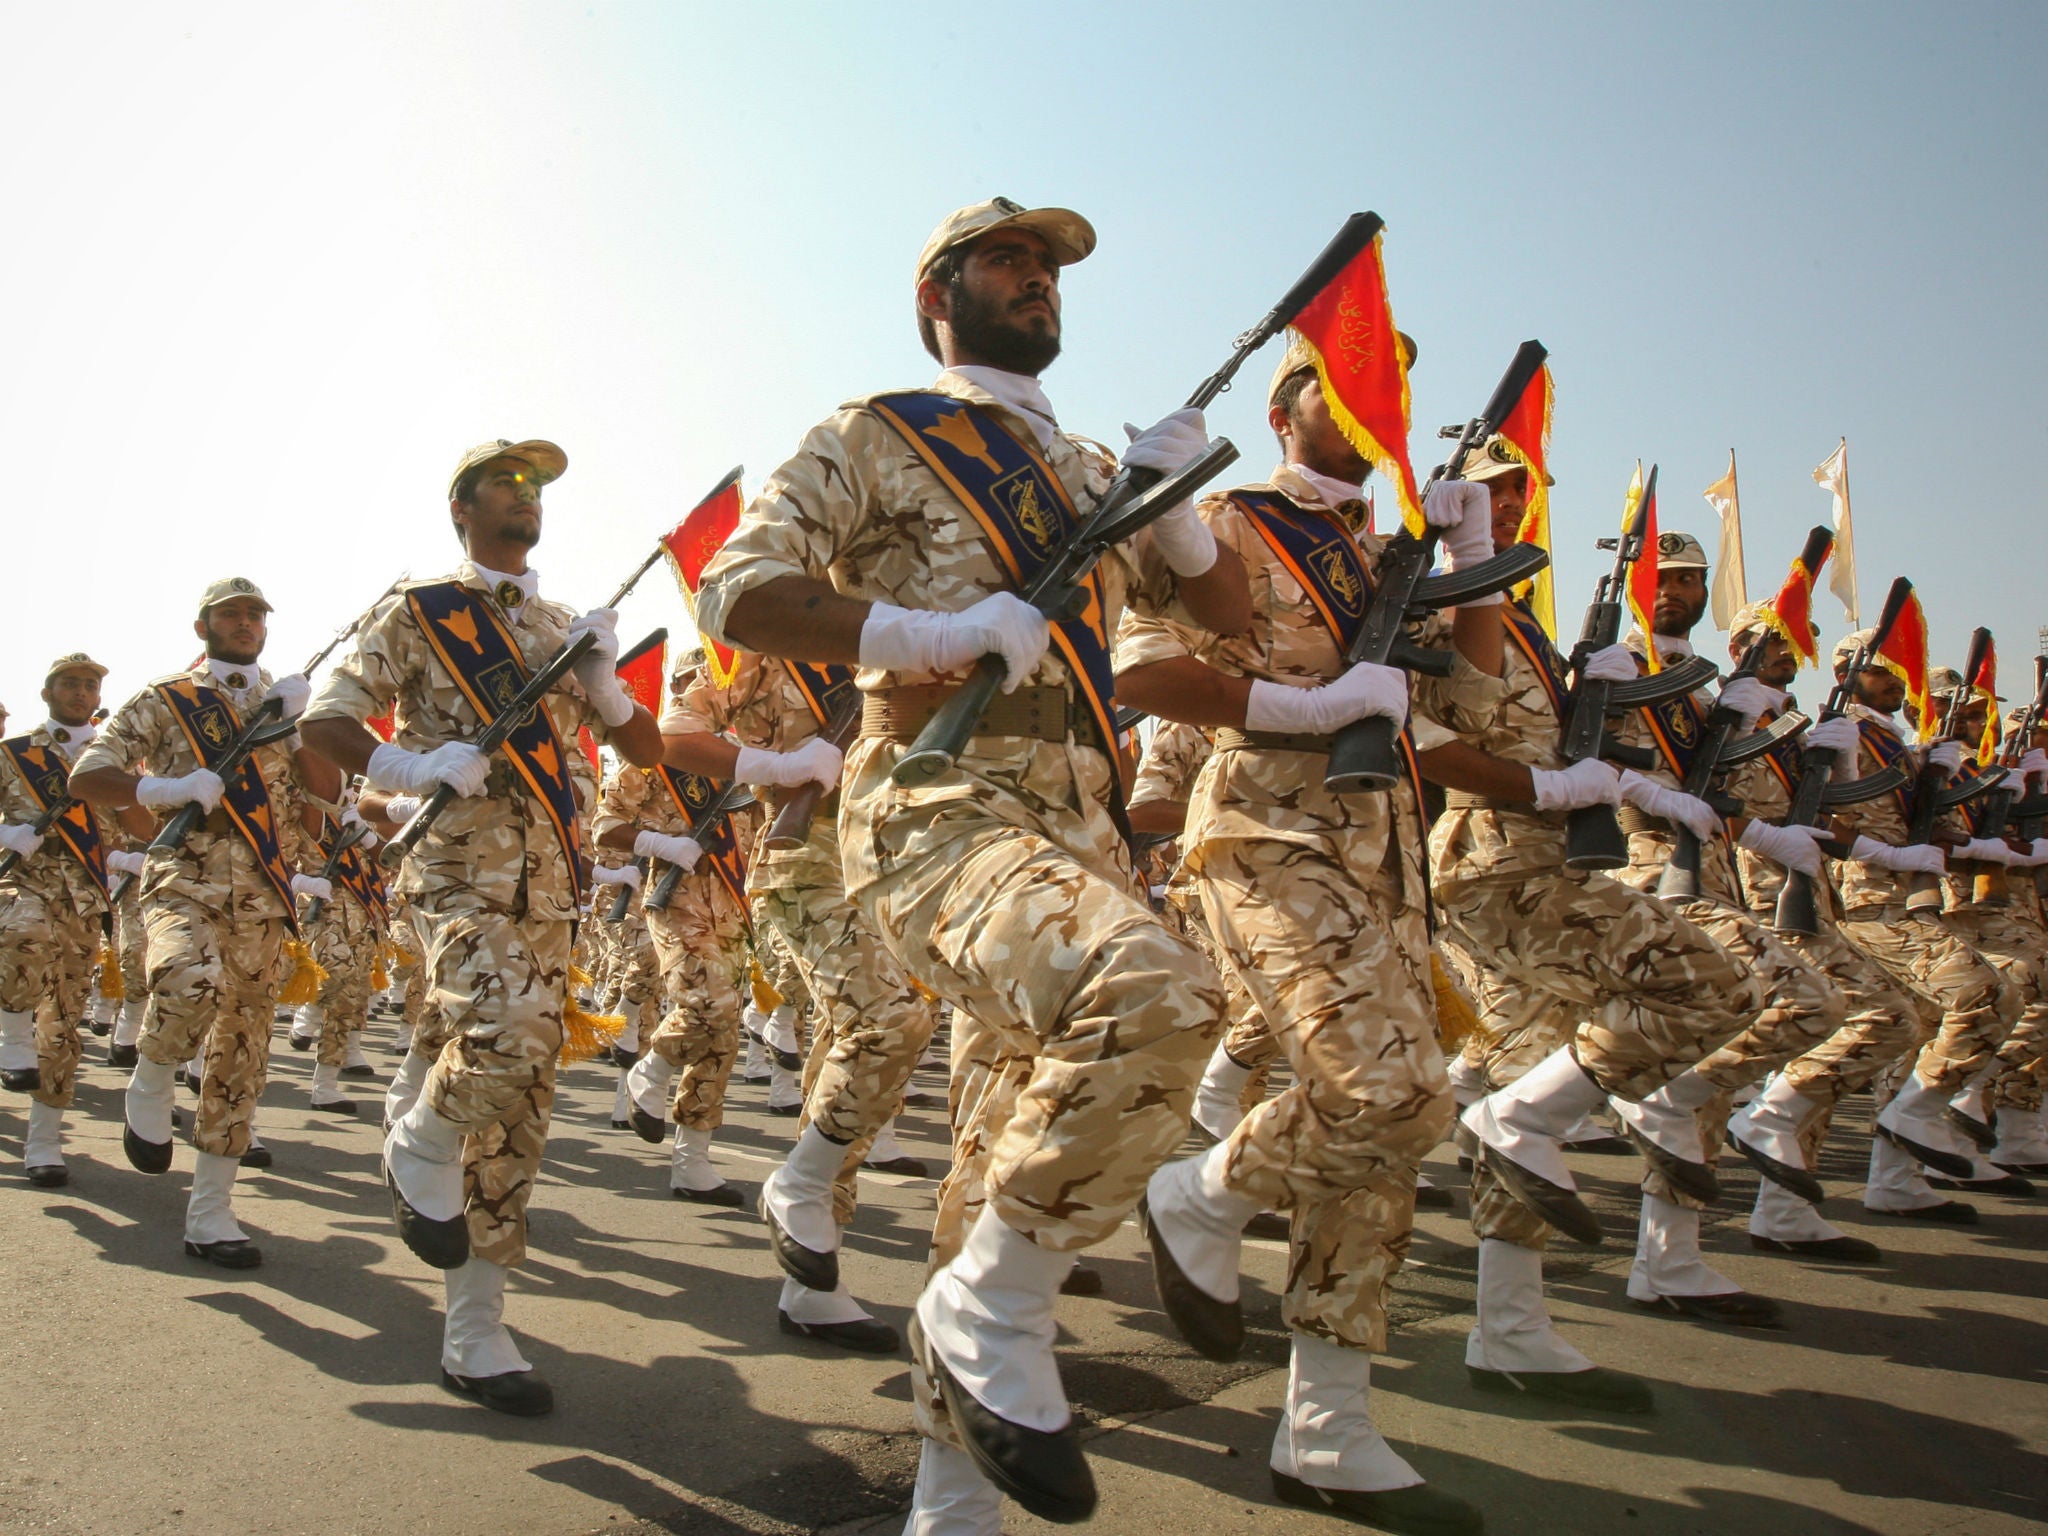 Members of the Iranian Revolutionary Guard, which is accused of supporting terrorist groups around the Middle East